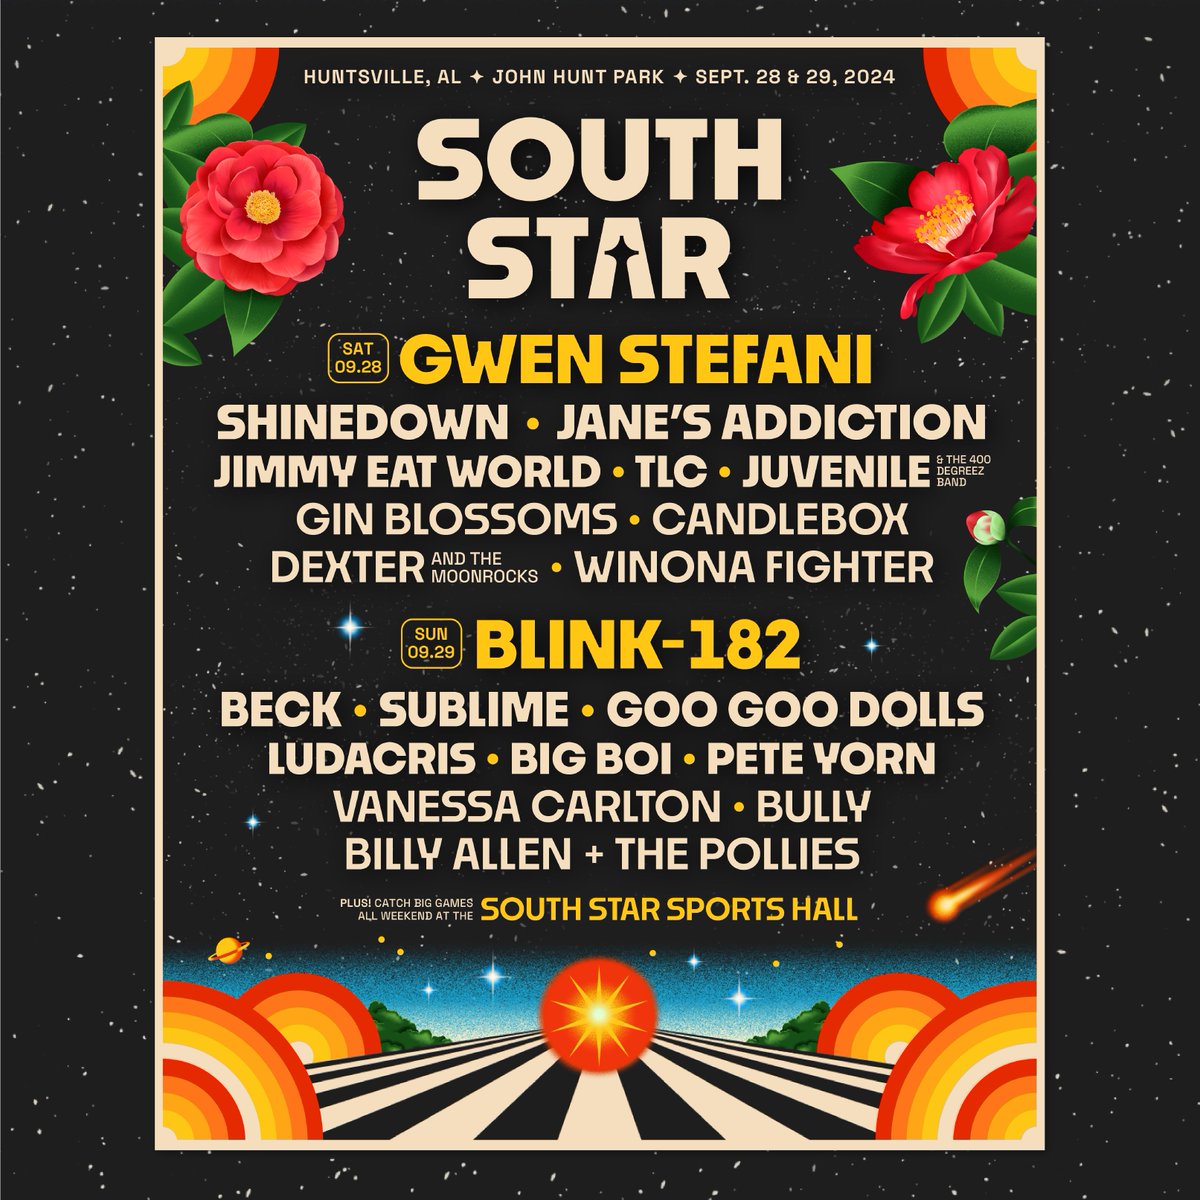 3...2...1...South Star is ON SALE 🤘❤️‍🔥 Lock in your 2-Day or 1-Day Tickets for just $25 down today! southstarfestival.com 🎸